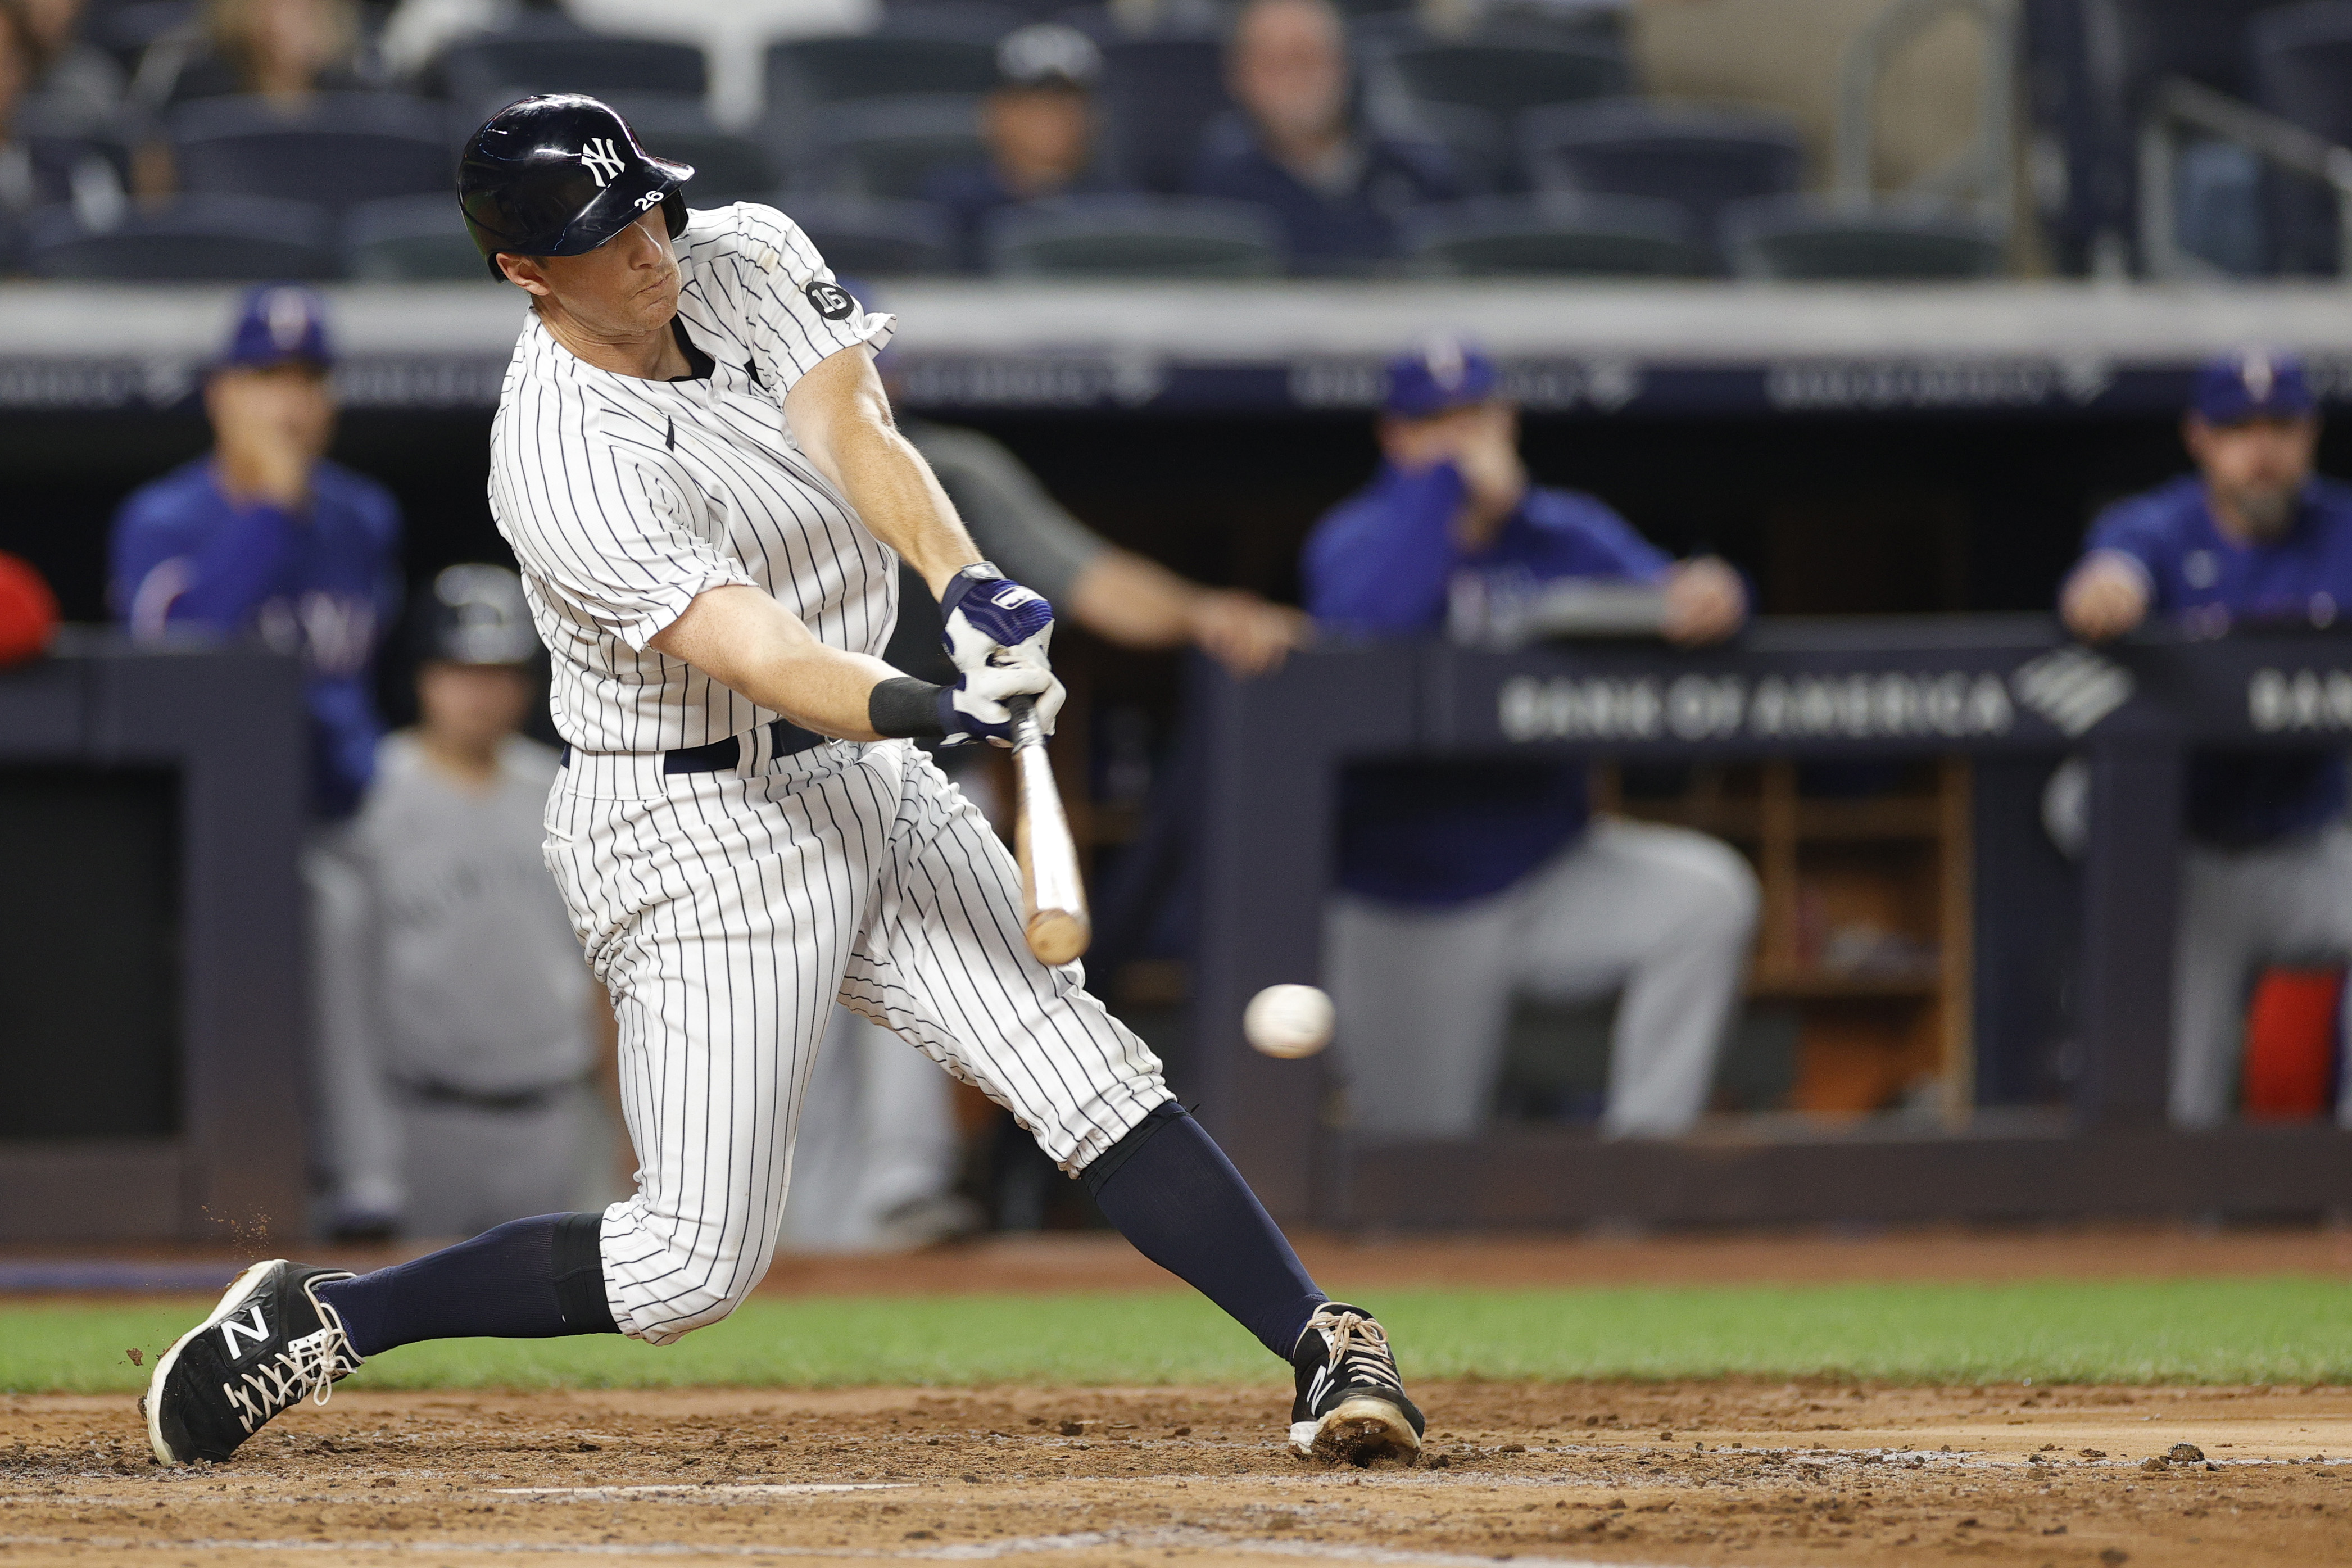 Yankees' DJ LeMahieu gets pivotal injury update after missing